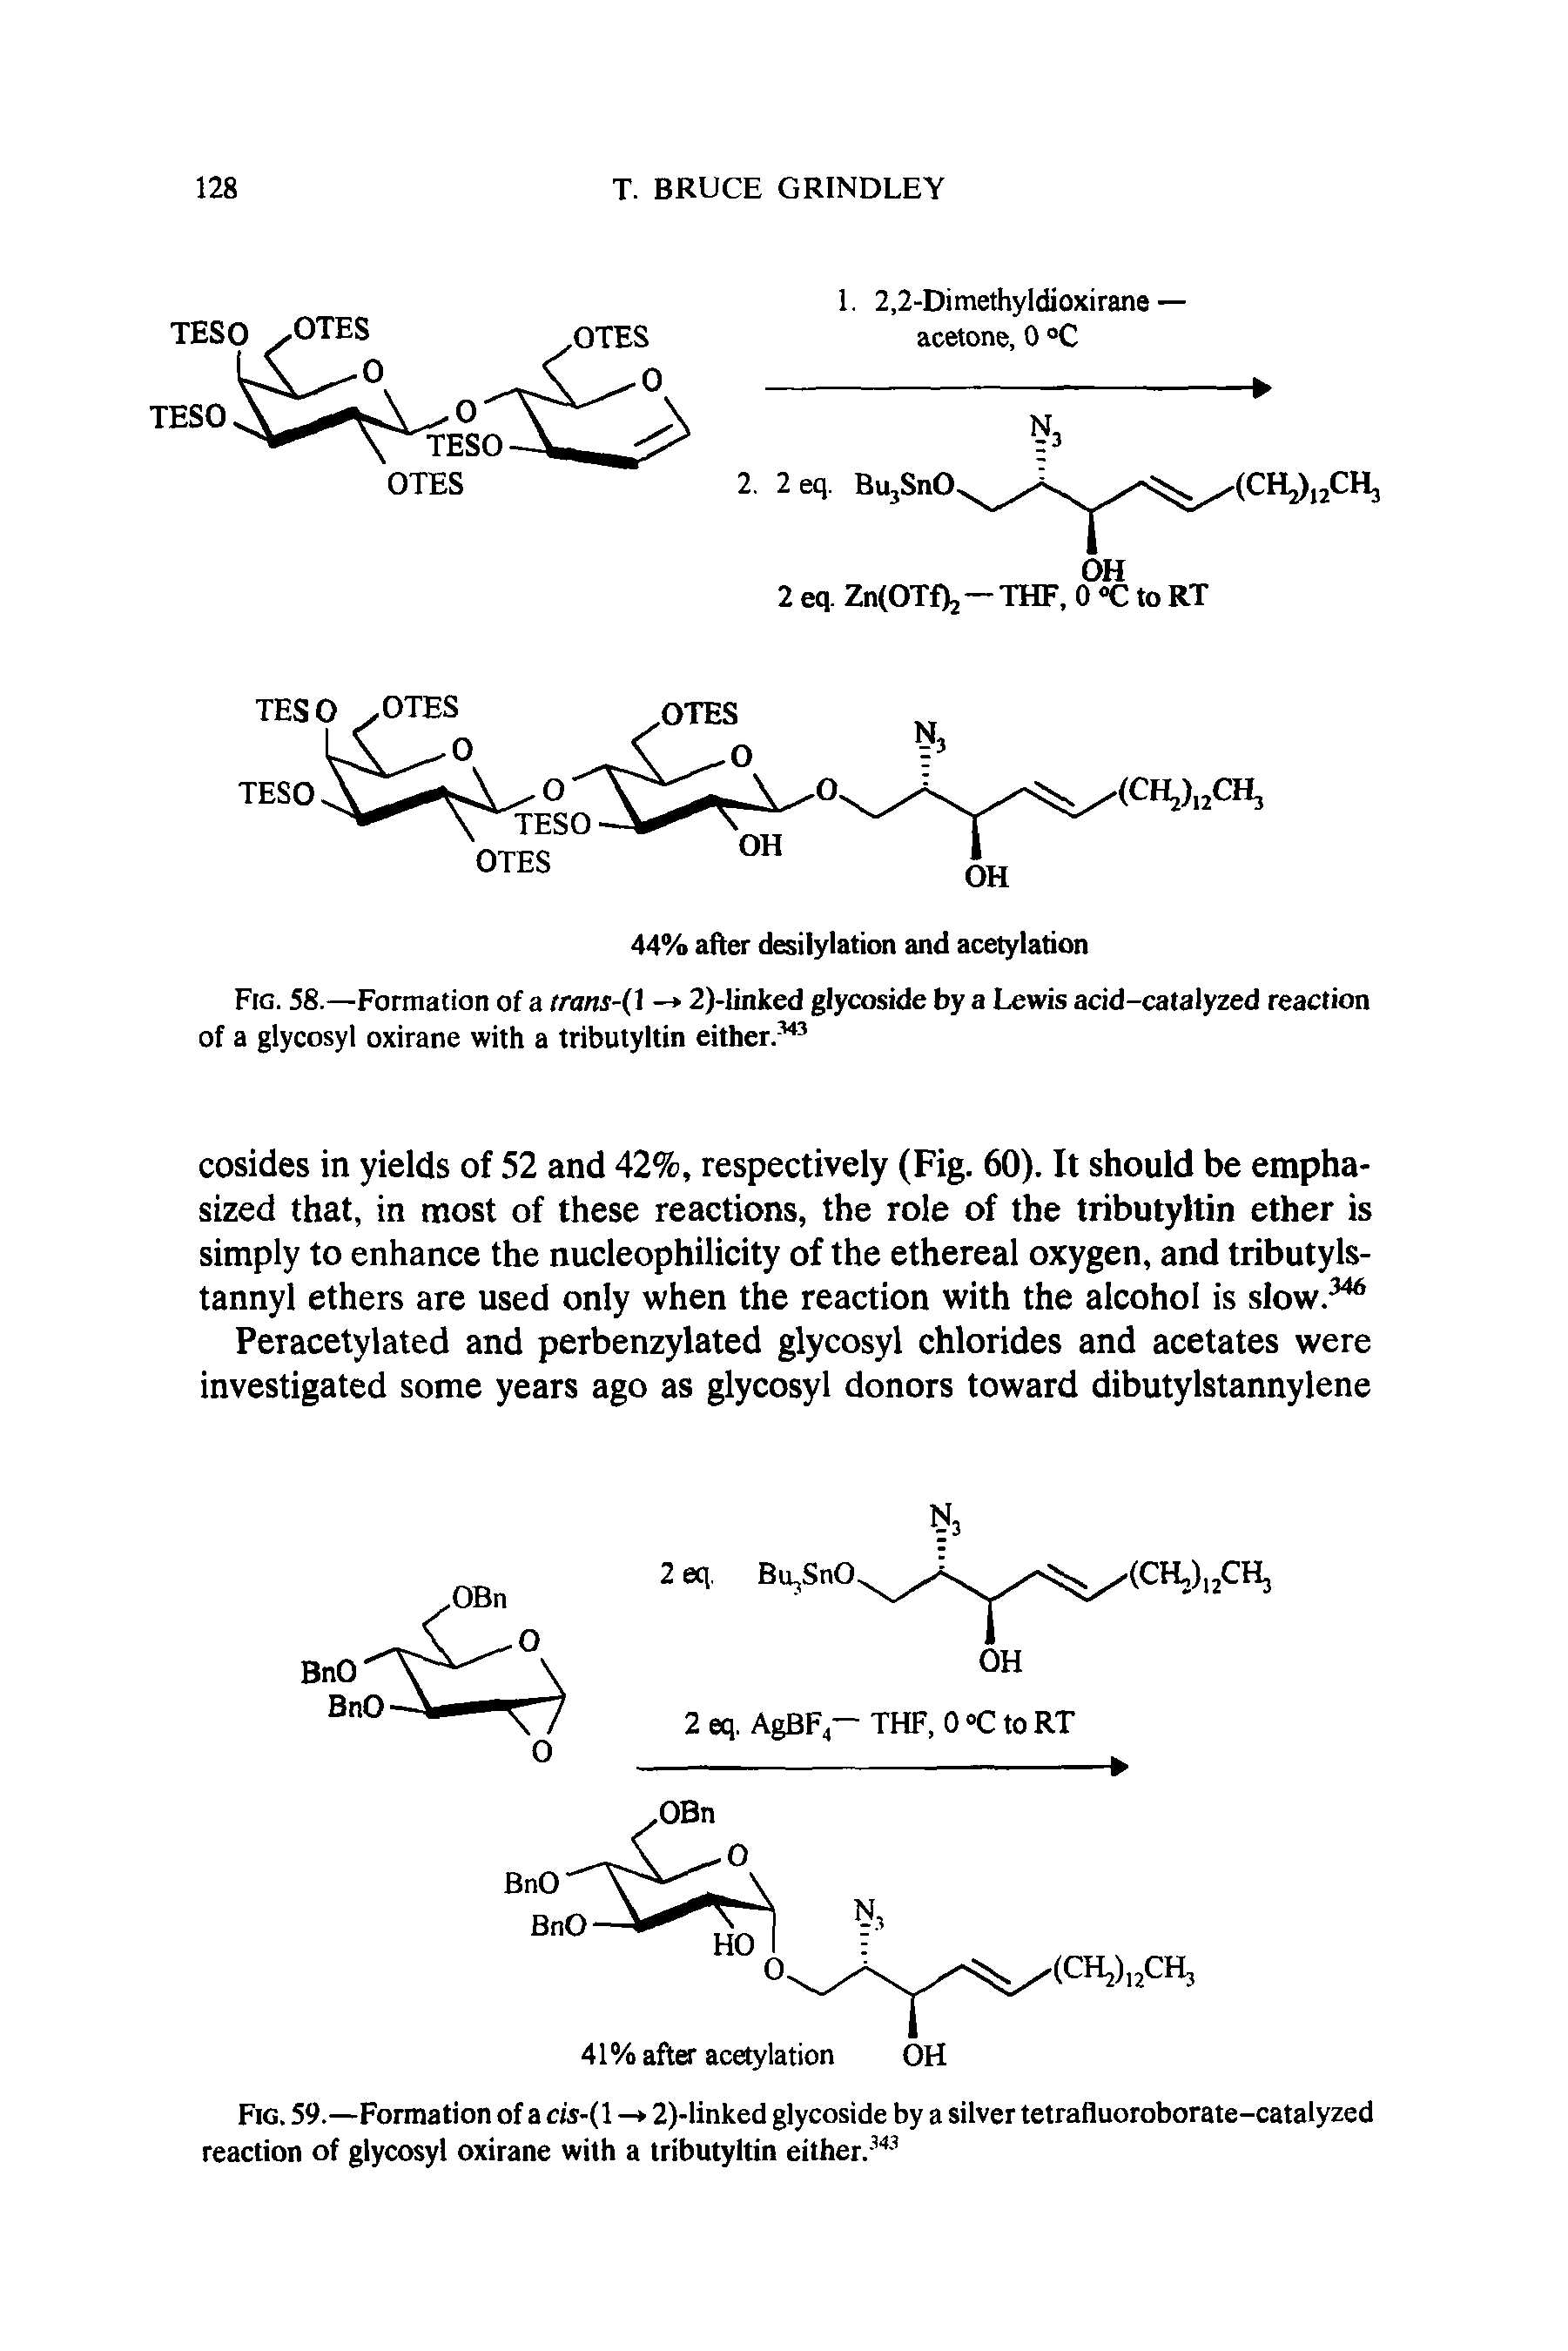 Fig. 58.—Formation of a trans-( 1 — 2)-linked glycoside by a Lewis acid-catalyzed reaction of a glycosyl oxirane with a tributyltin either.343...